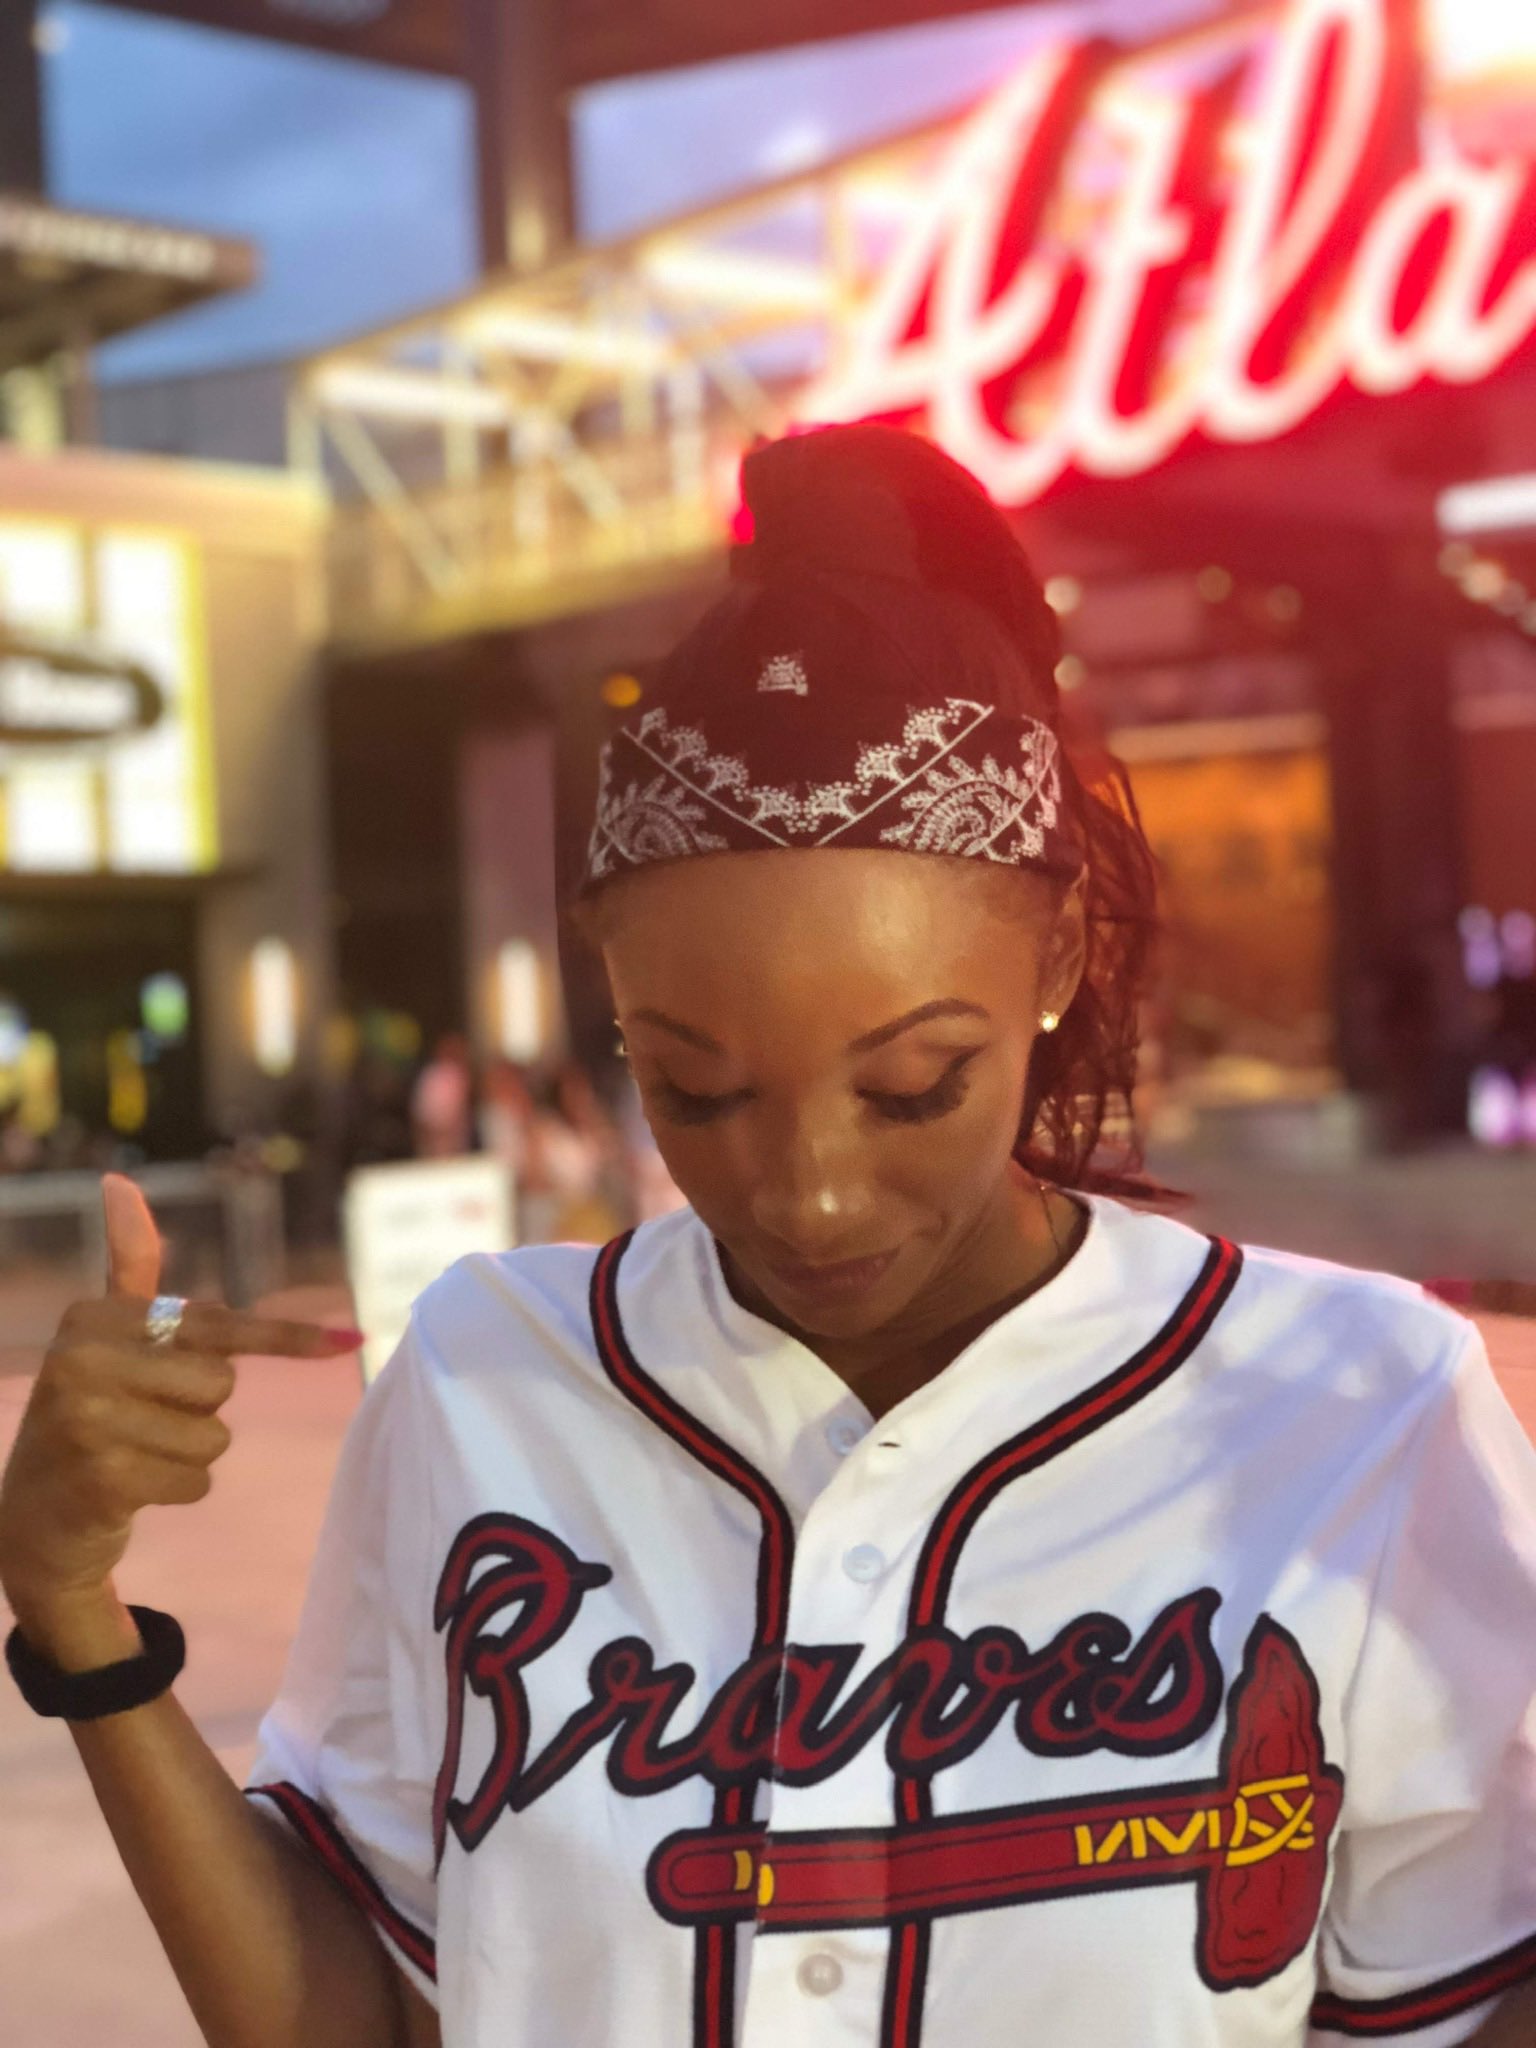 red braves jersey outfit